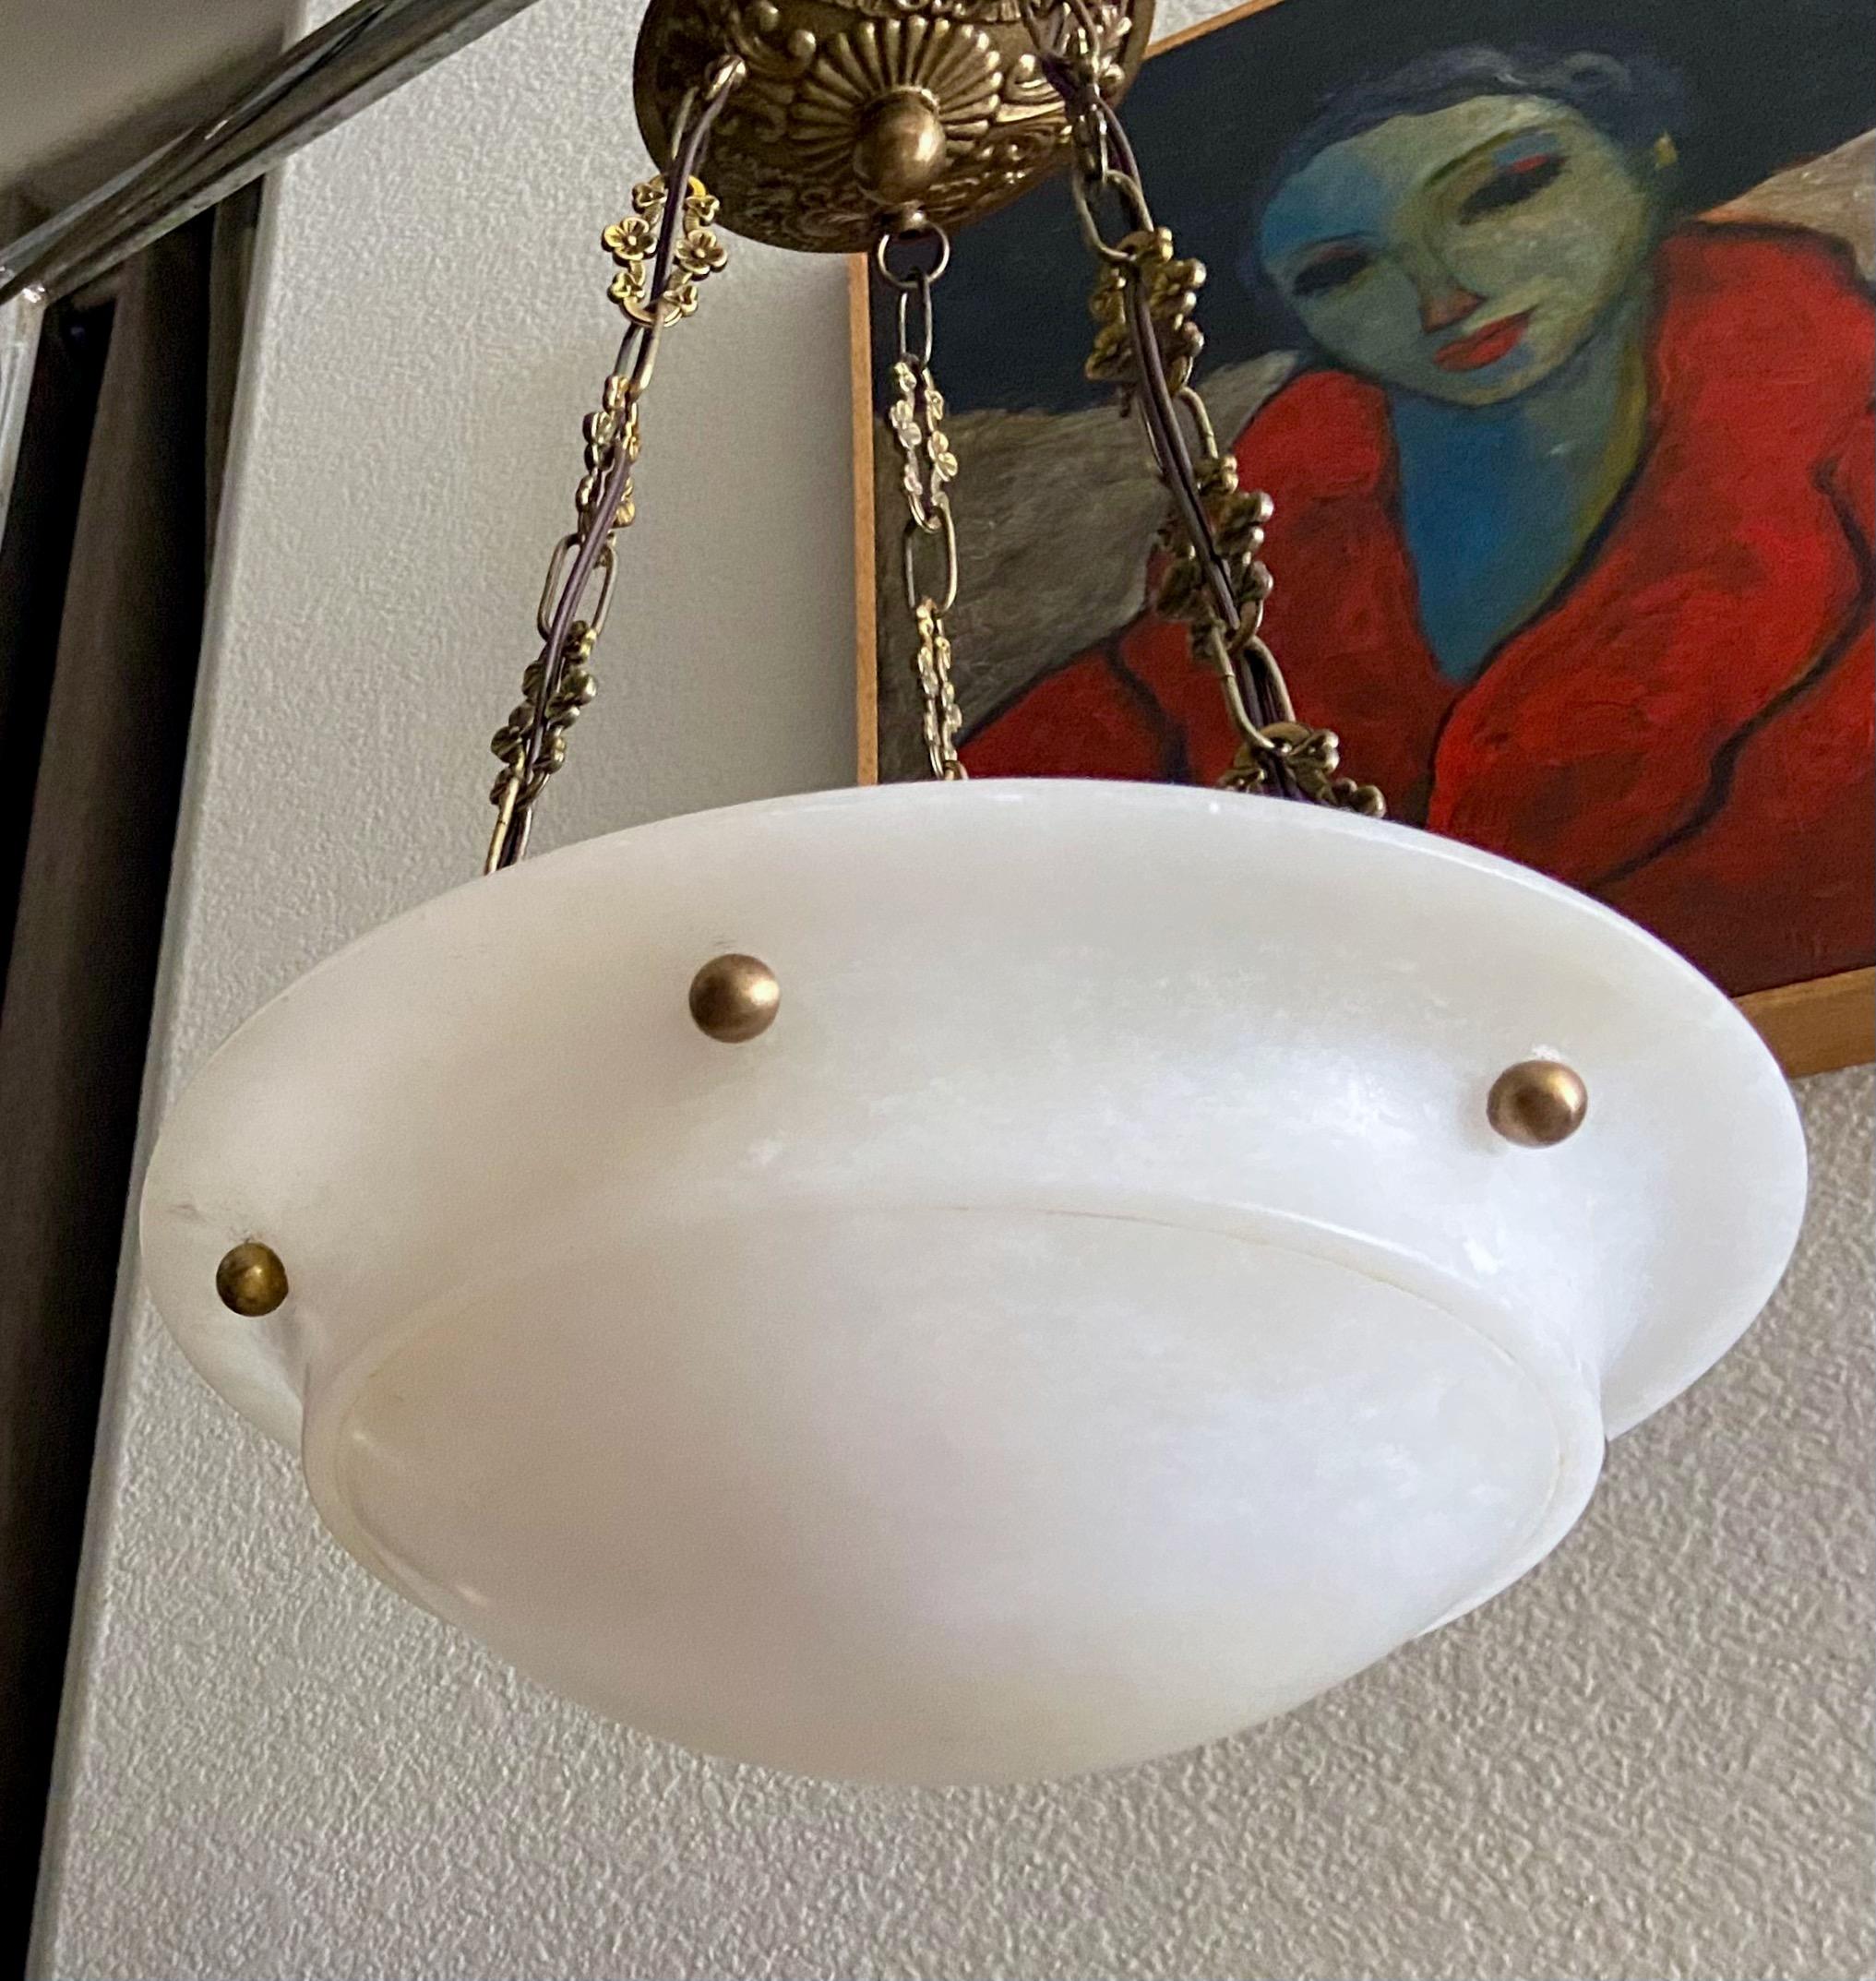 Alabaster pendant or chandelier light with aged patinated brass fittings in the Directoire style. Smaller scale fixture perfect for hall or a powder room. Newly wired for US, fixture uses two candelabra 